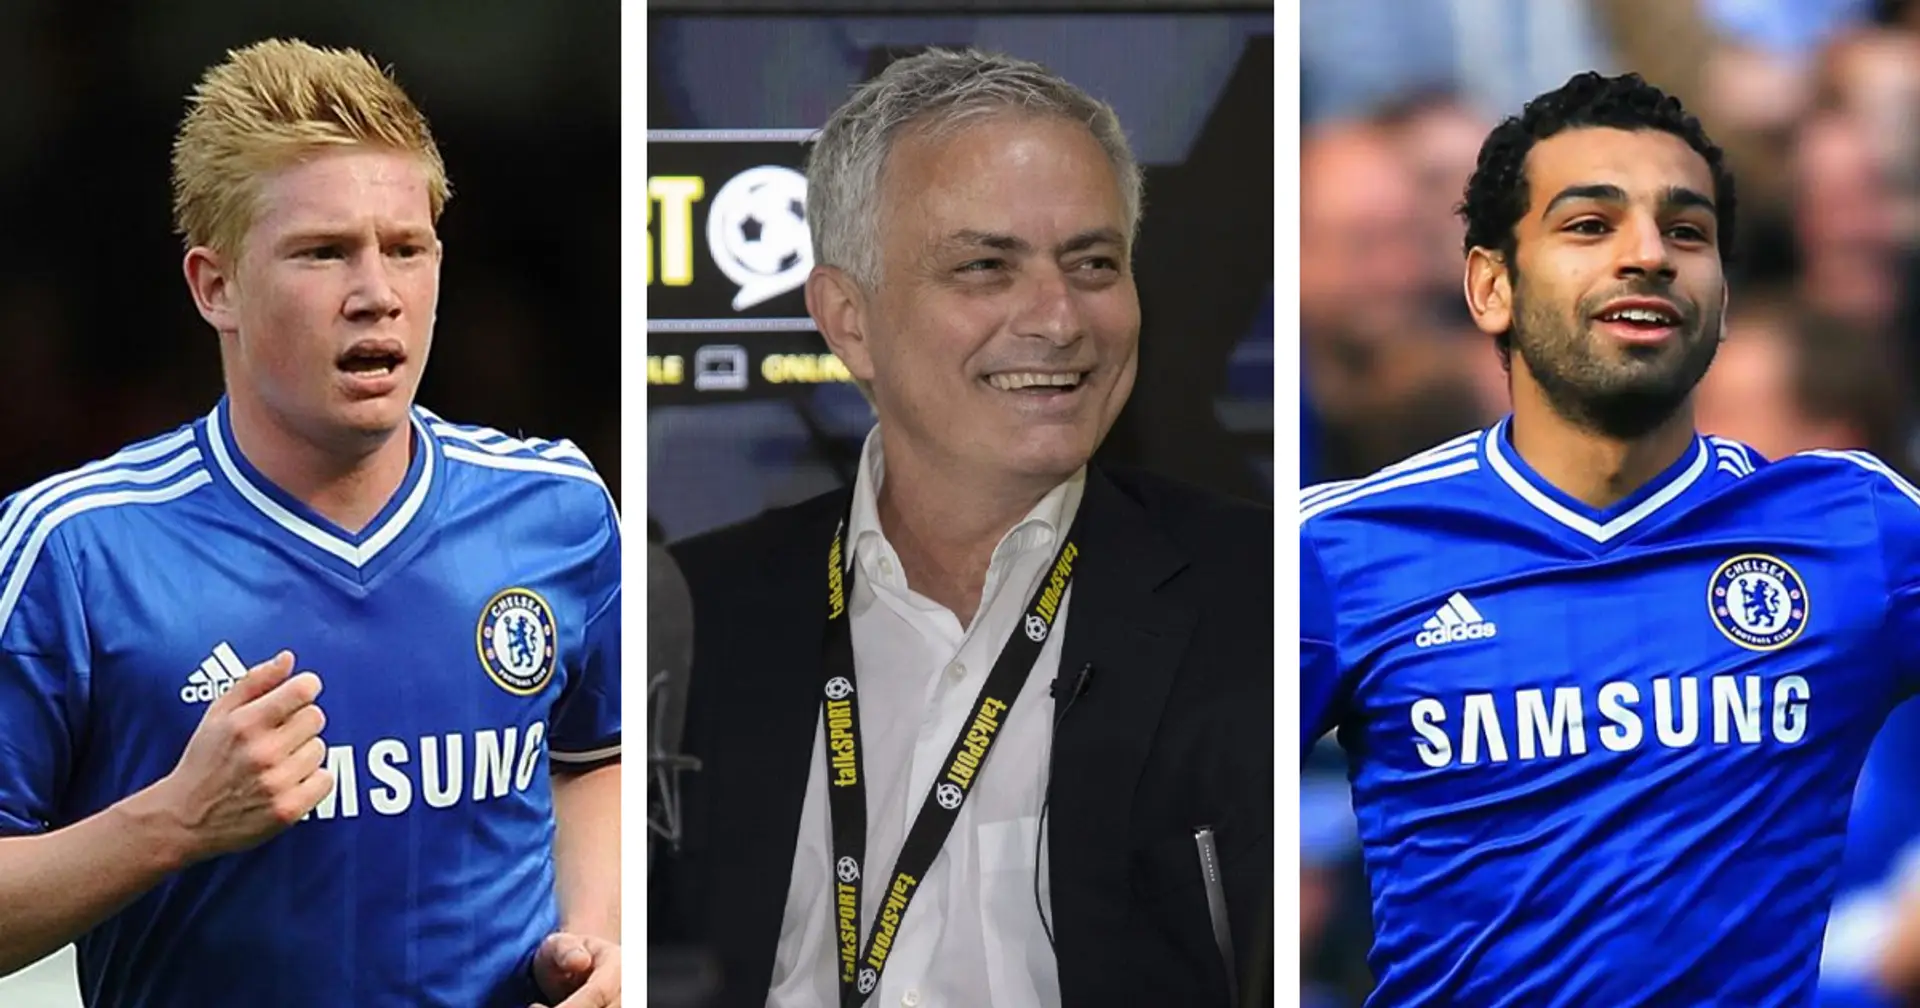 Jose Mourinho reveals the reason why Chelsea sold De Bruyne and Mohamed Salah